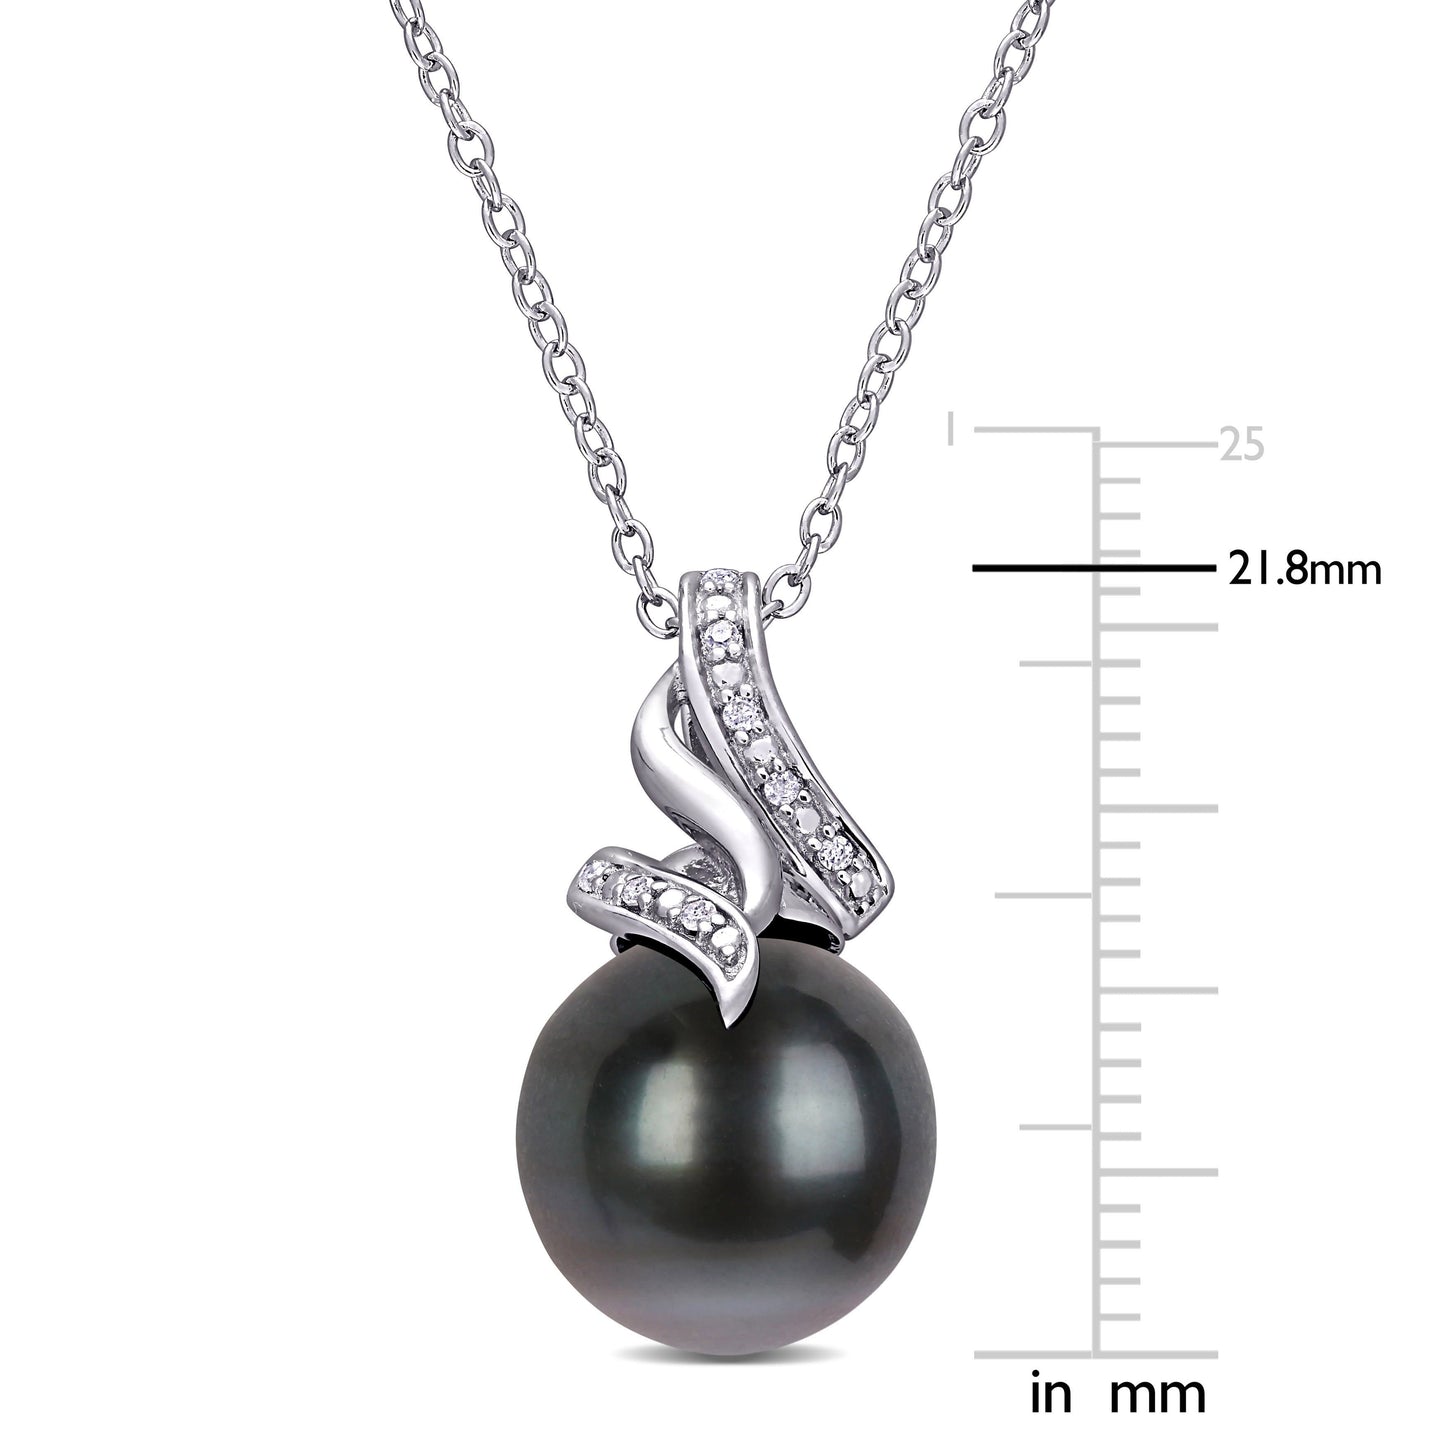 Michiko 9-9.5mm Black Tahitian Pearl Necklace with Diamond Accents